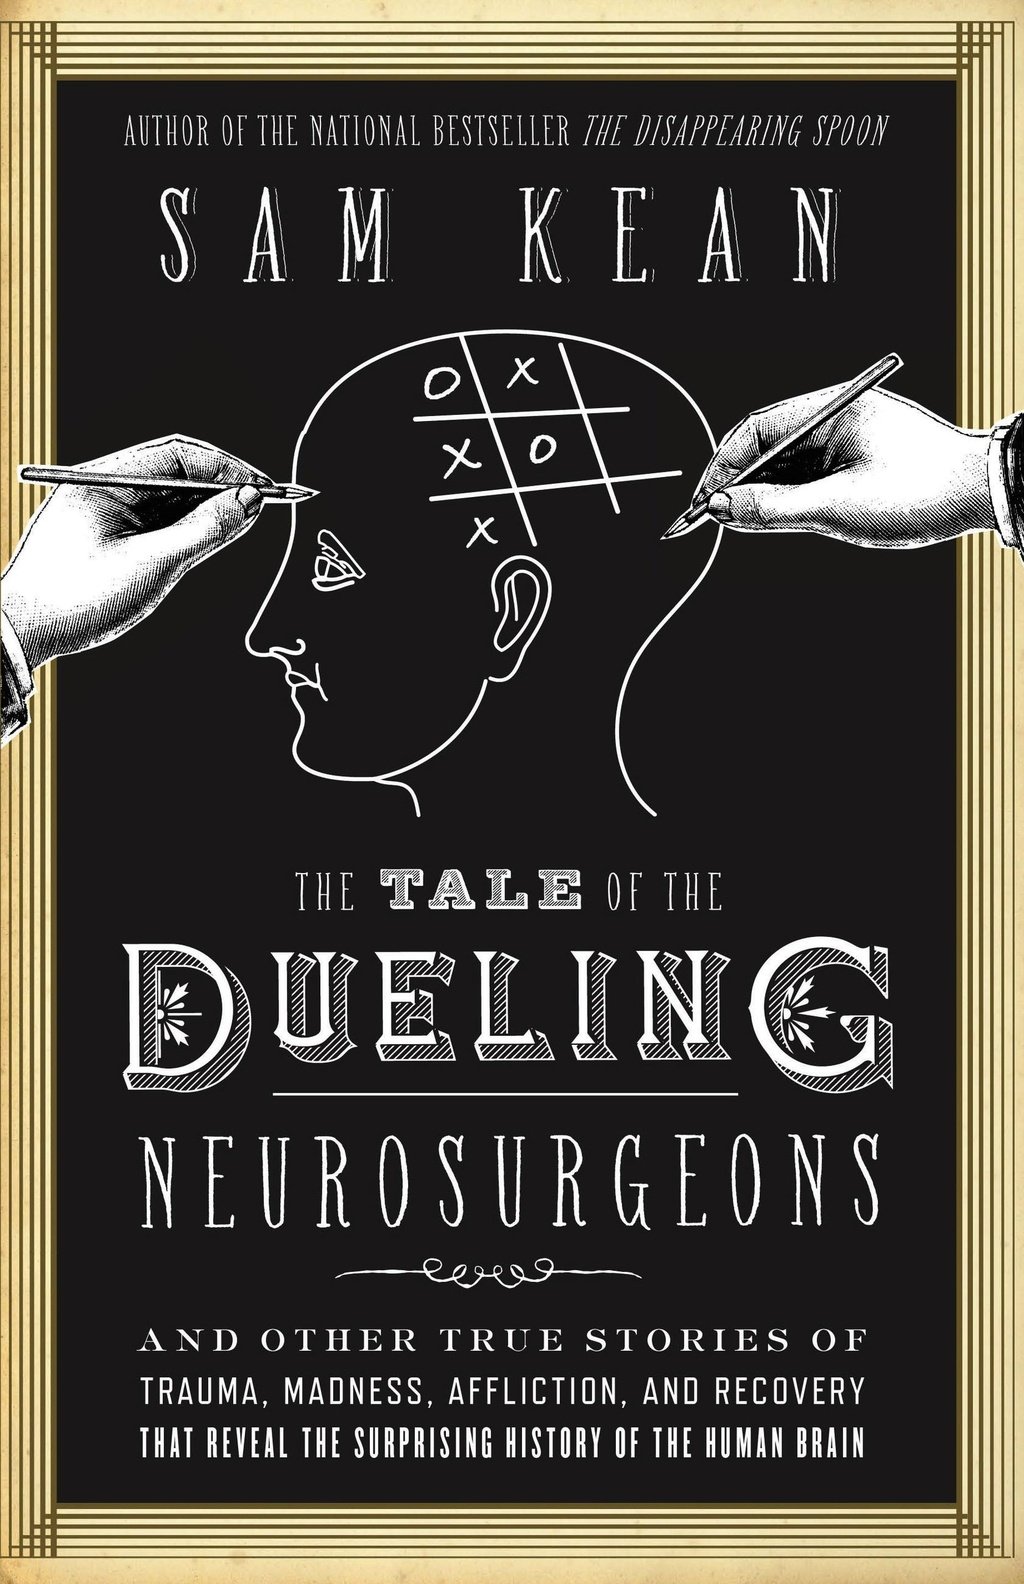 REVIEW: THE TALE OF THE DUELING NEUROSURGEONS by Sam Kean